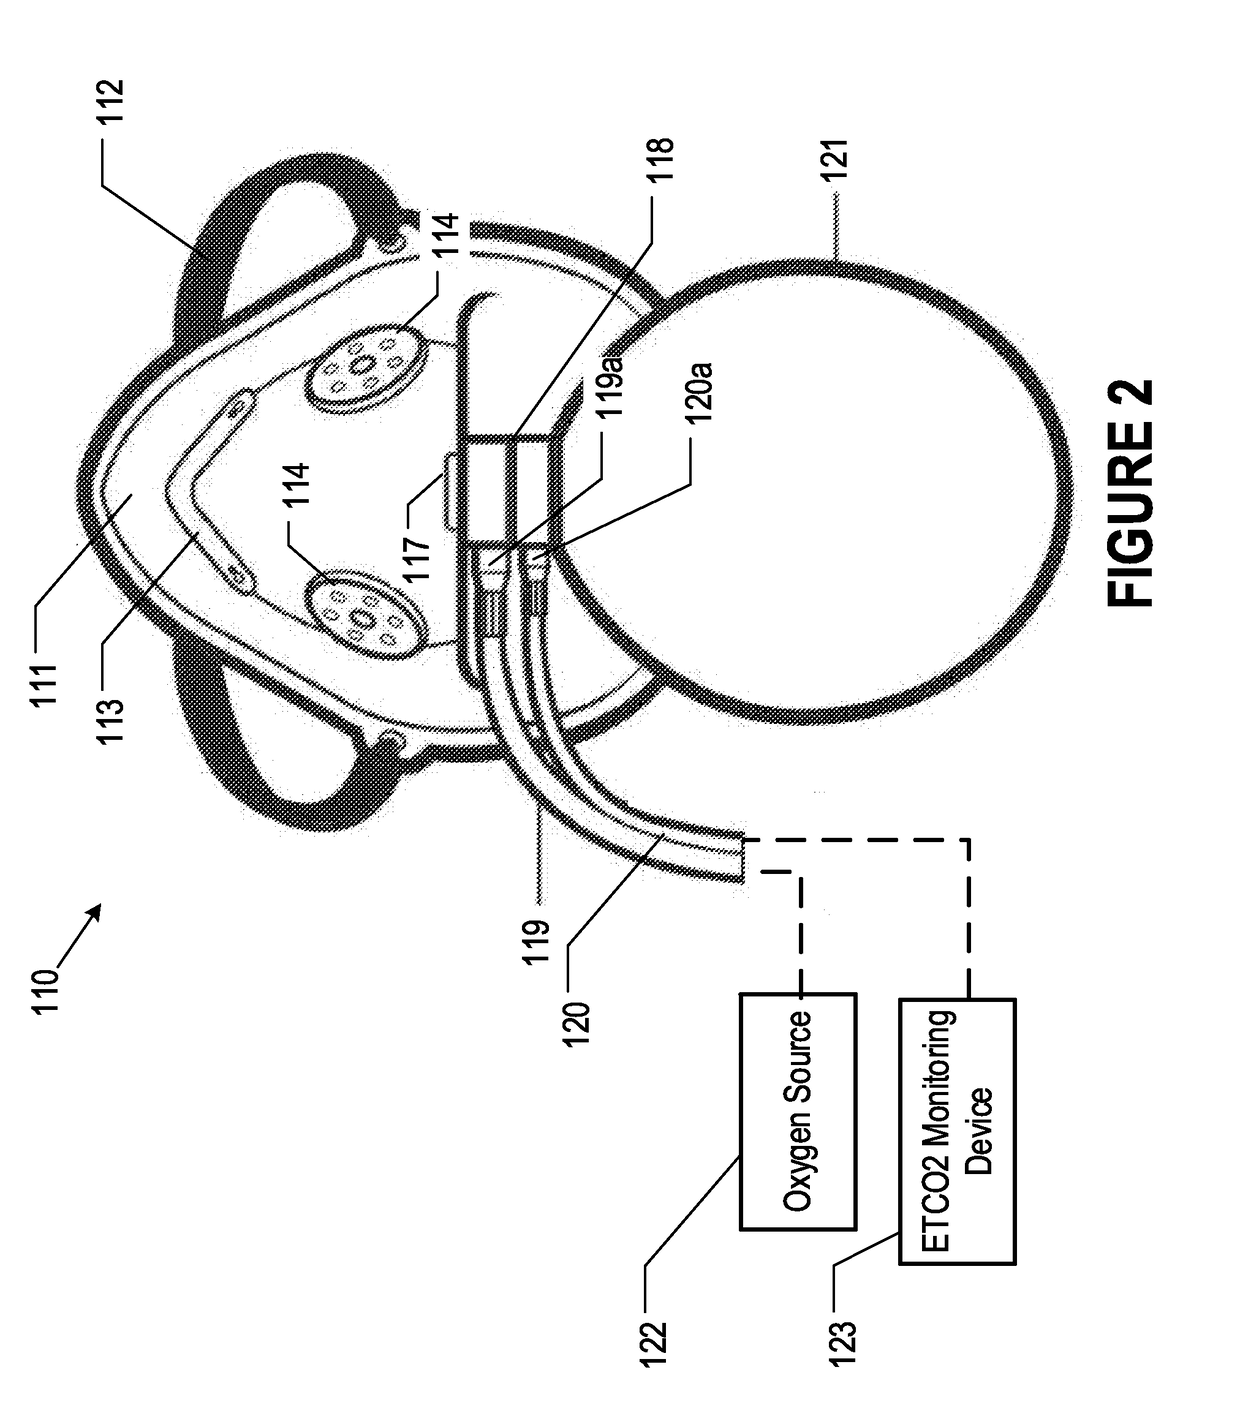 Oxygenation mask with integrated end-tidal carbon dioxide monitoring